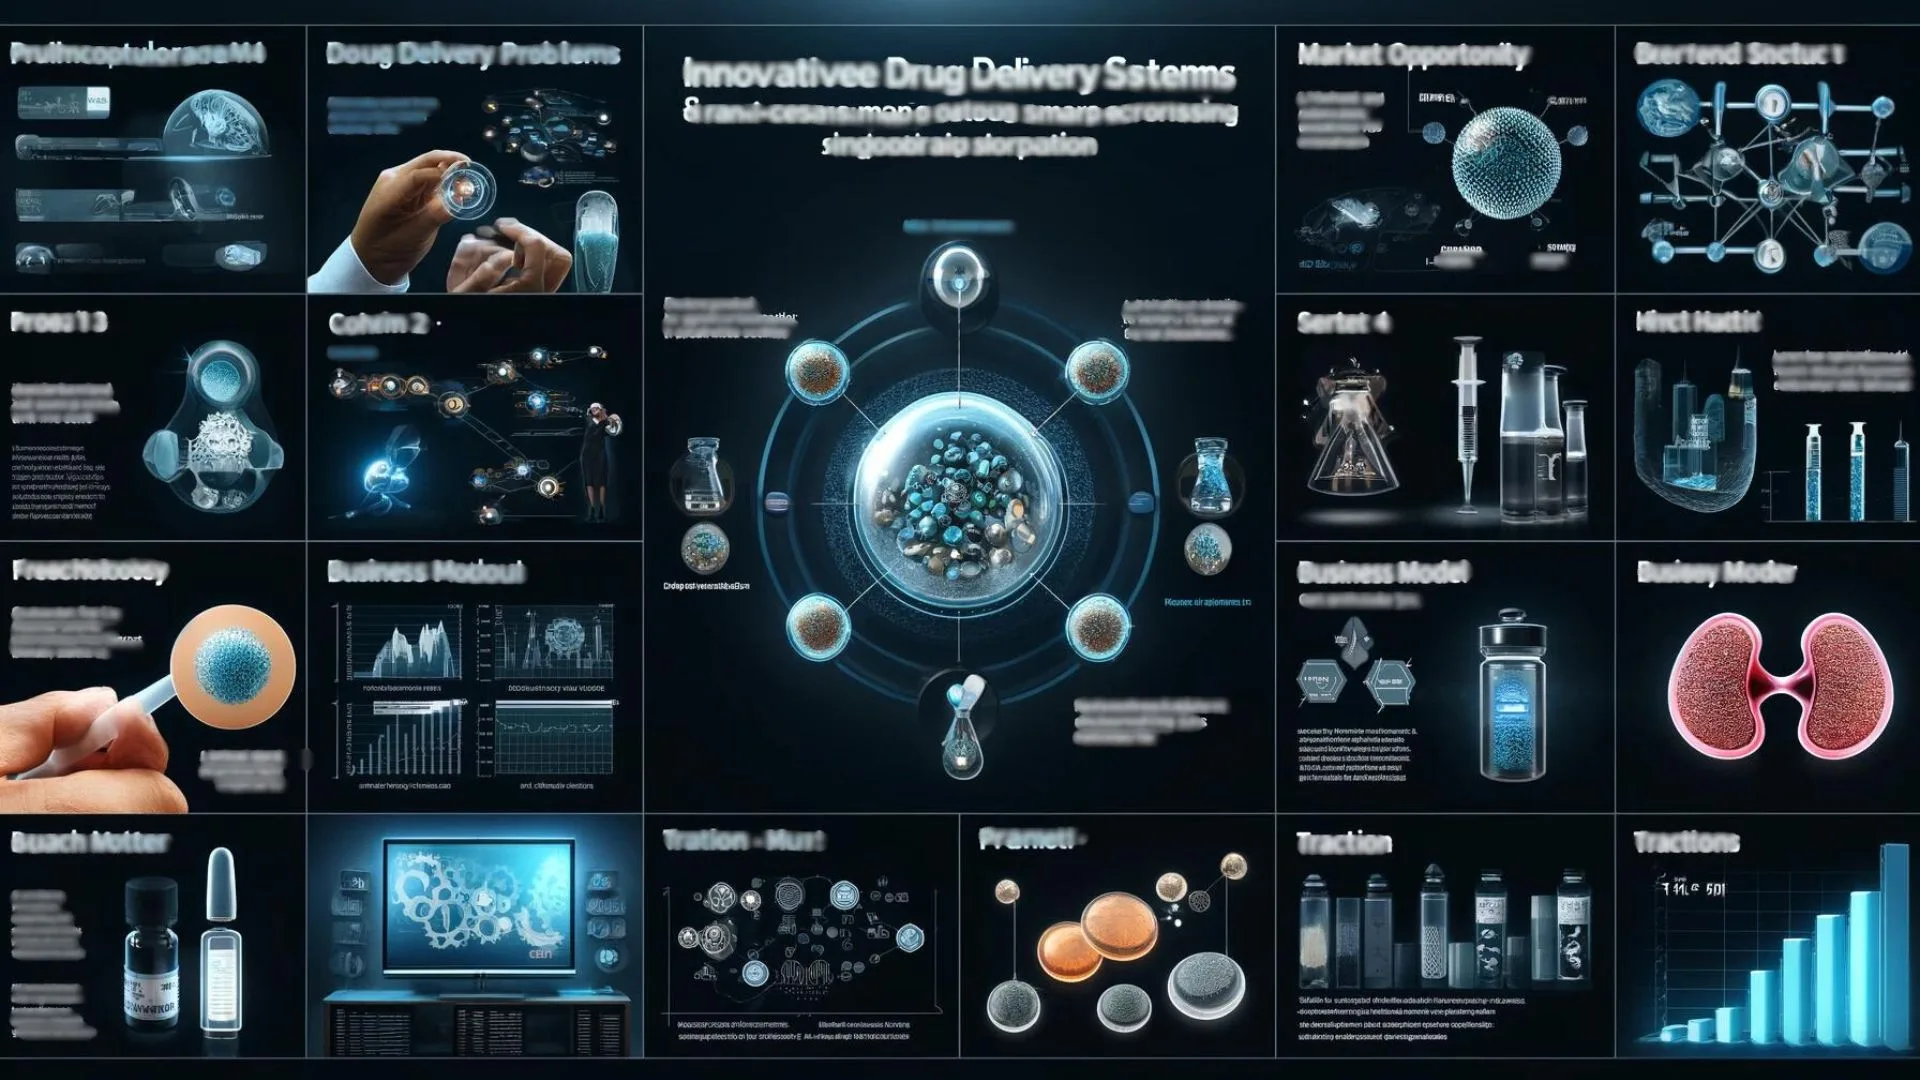 Drug Delivery Systems pitch deck